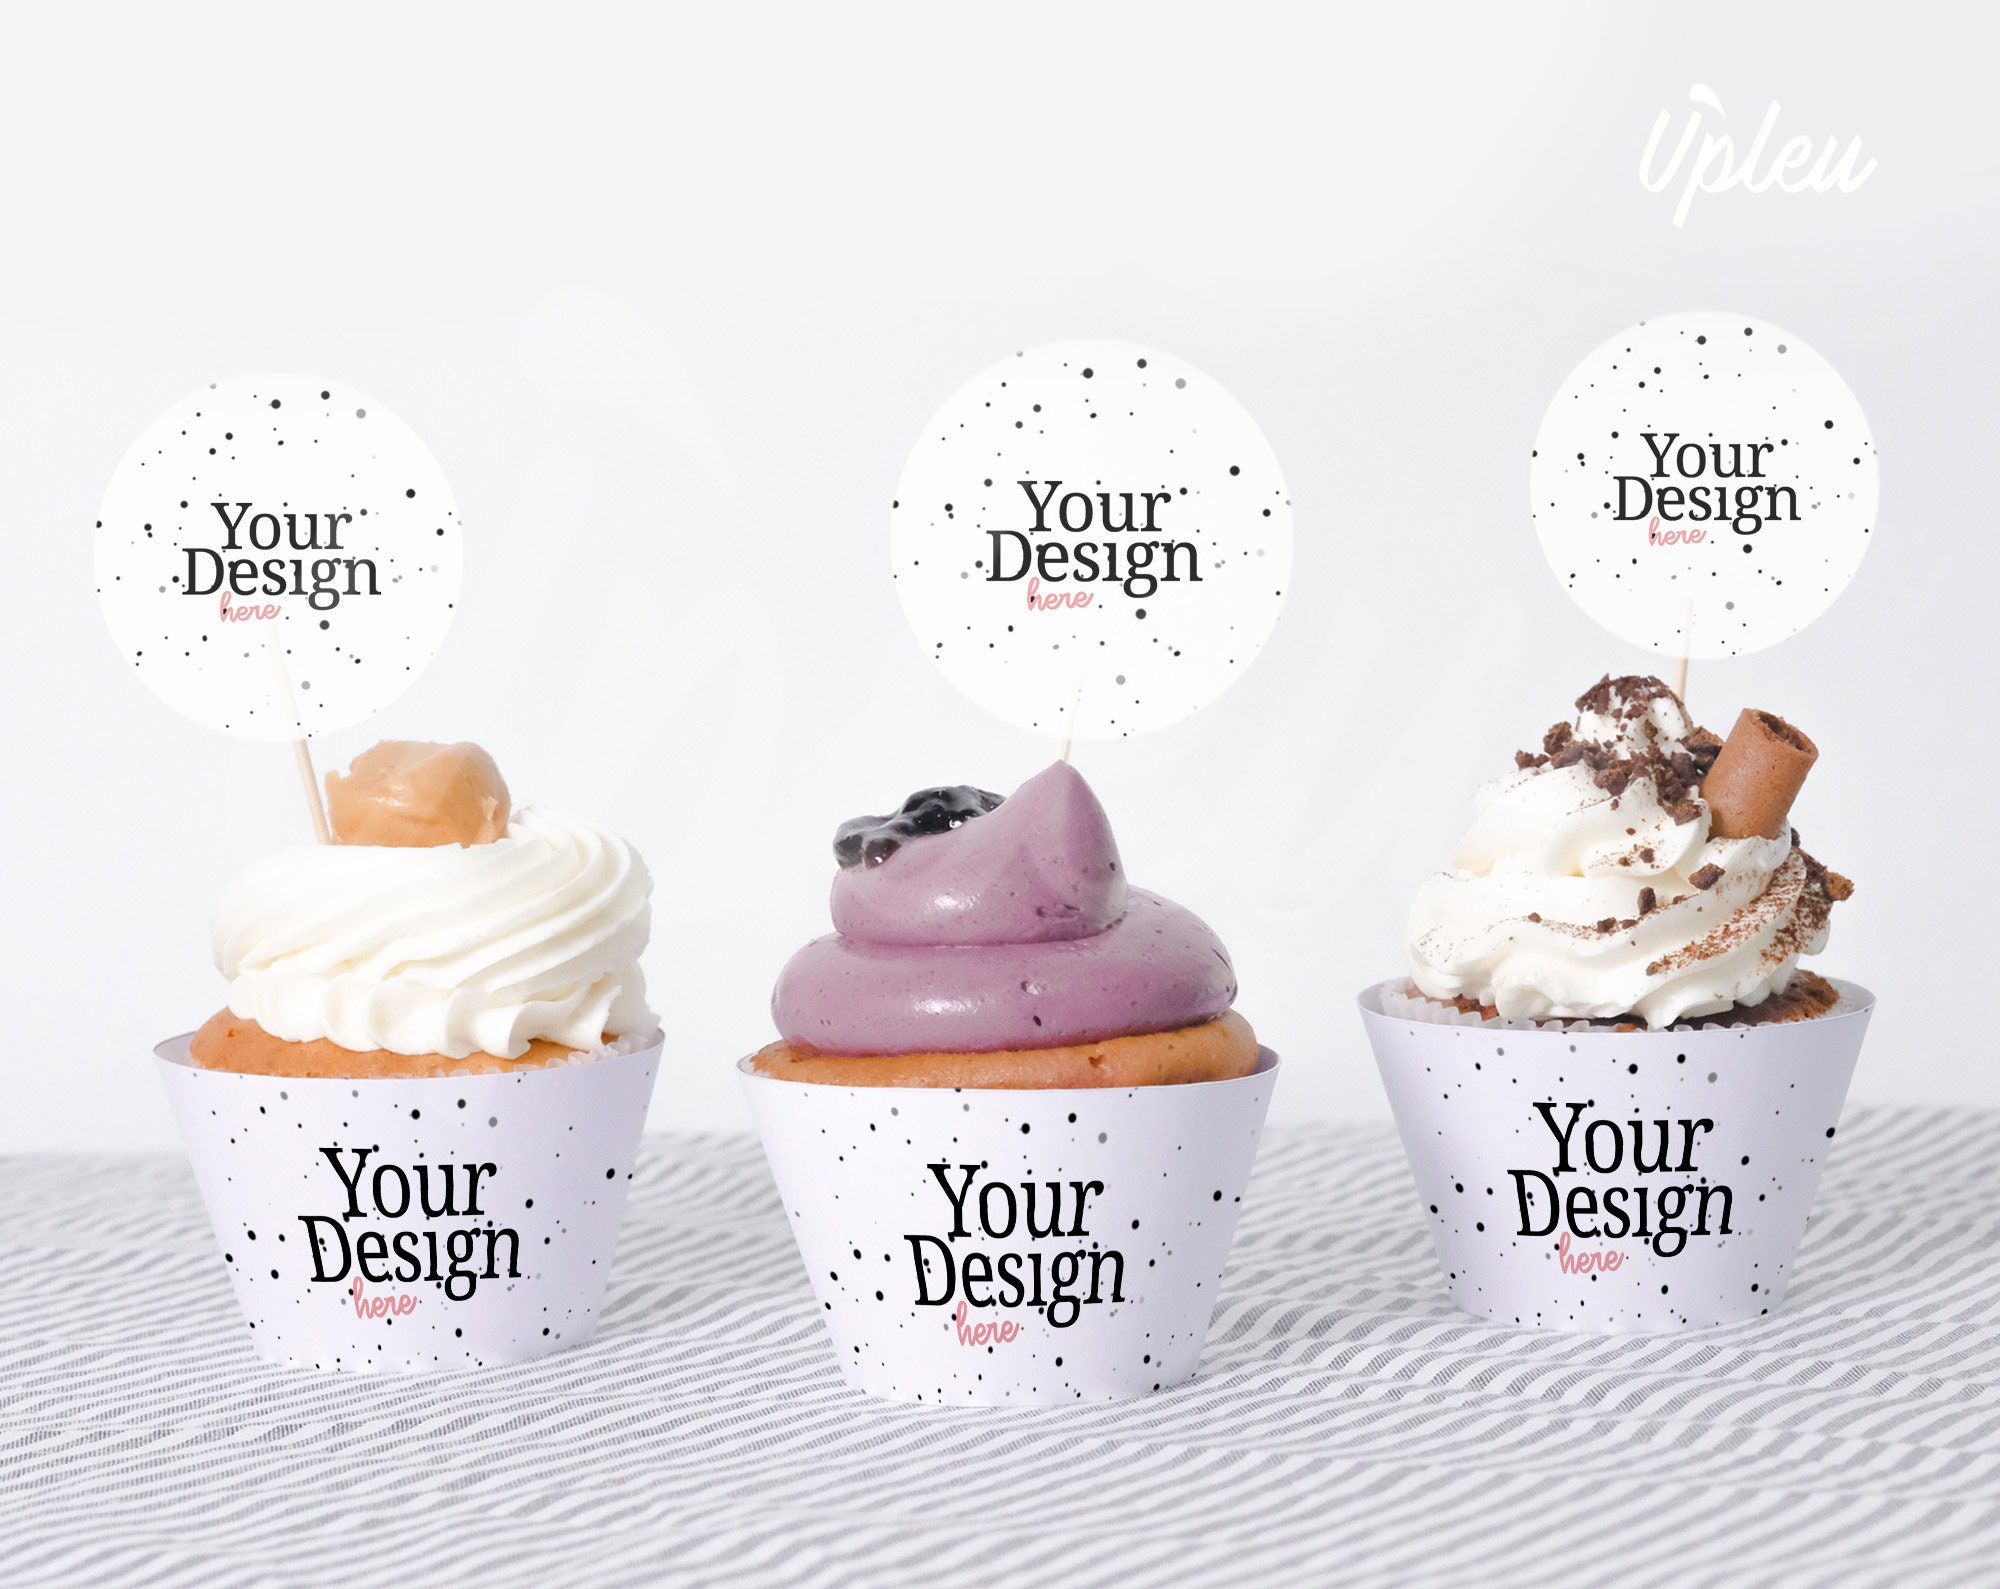 Download Yellowimages Mockups Cupcake Mockup Object Mockups - Free PSD Mockups Smart Object and Templates ...